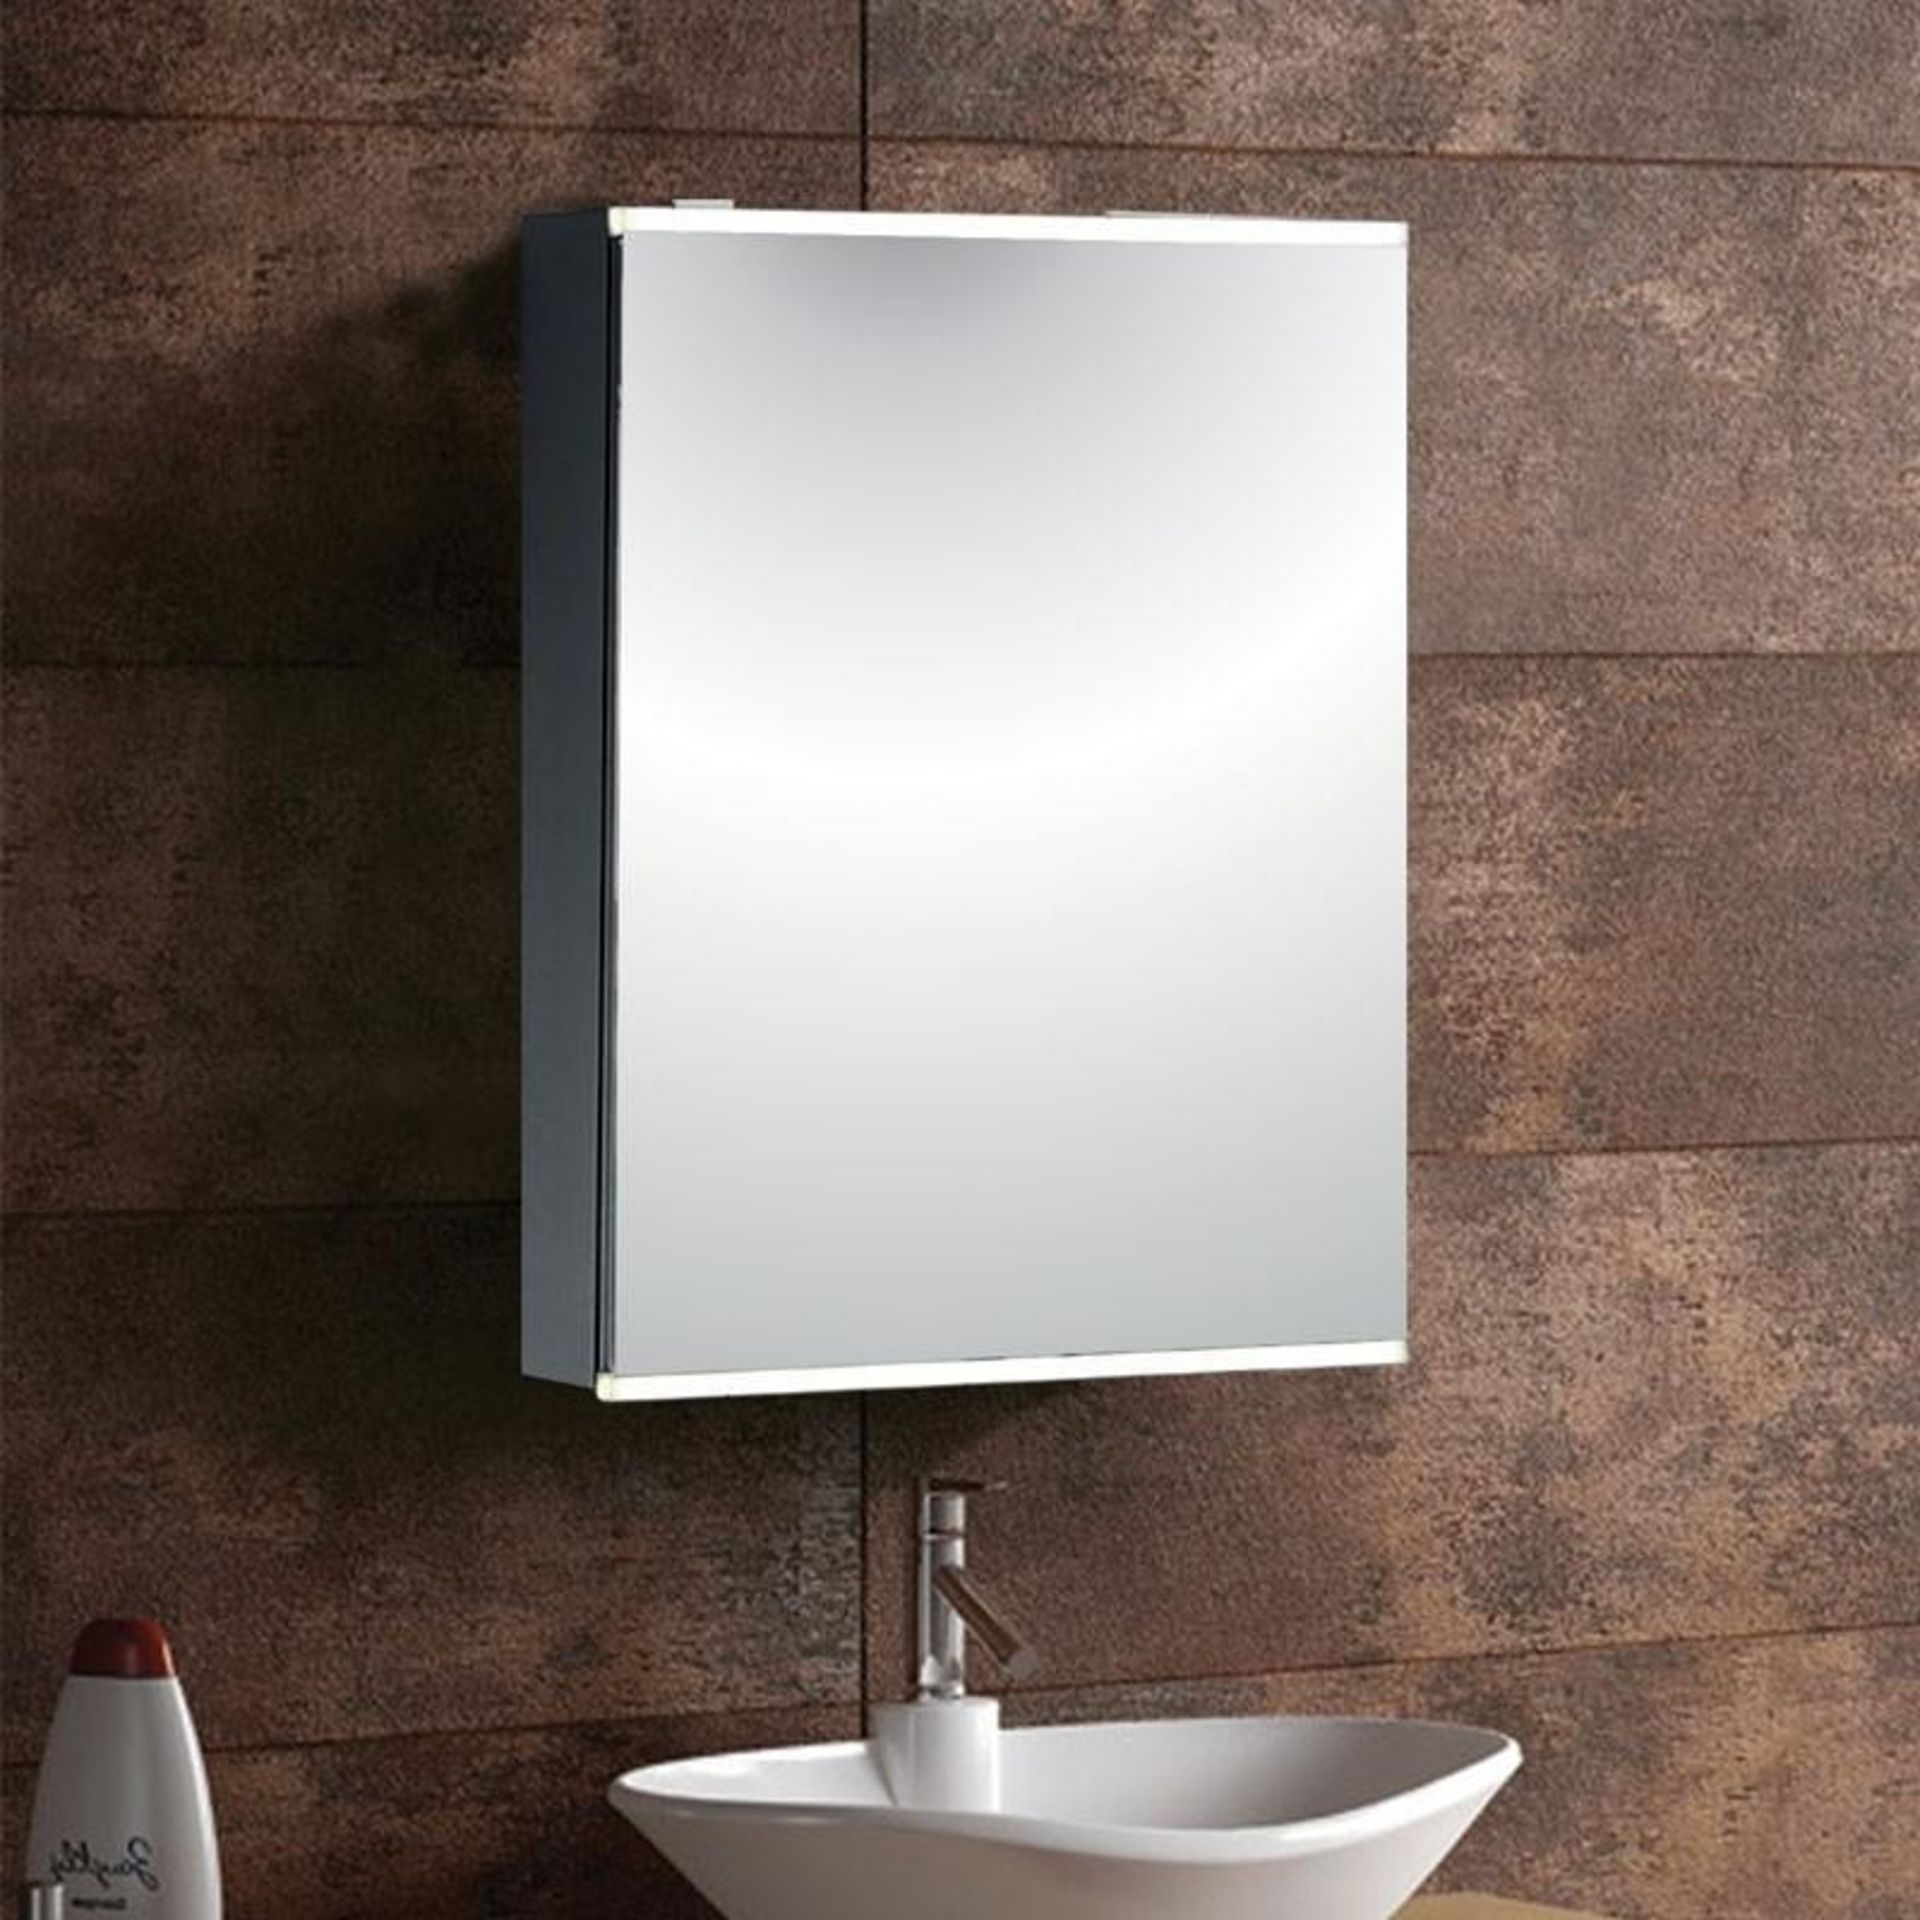 1 x Gloss White 1200mm 4-Door Double Basin Freestanding Bathroom Cabinet - New & Boxed Stock - CL307 - Image 3 of 8